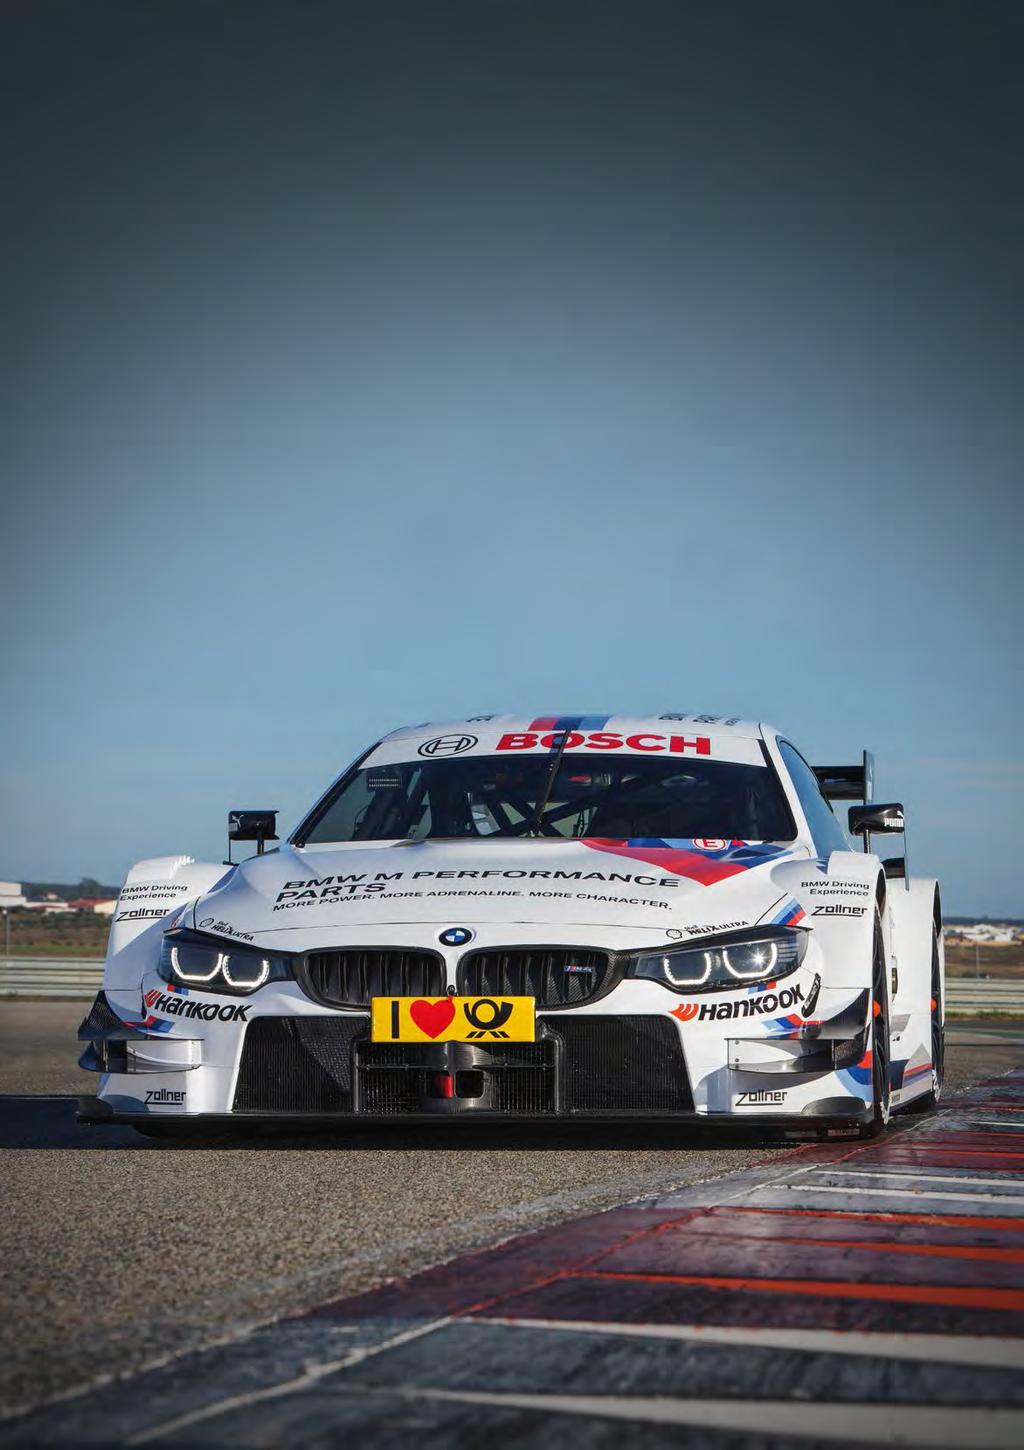 A BORN CHAMPION. BMW M4 DTM. The BMW M4 DTM came, saw and conquered. With the introduction of the successor to the BMW M3 DTM in 2014, BMW Motorsport entered a new era and what a start it was.